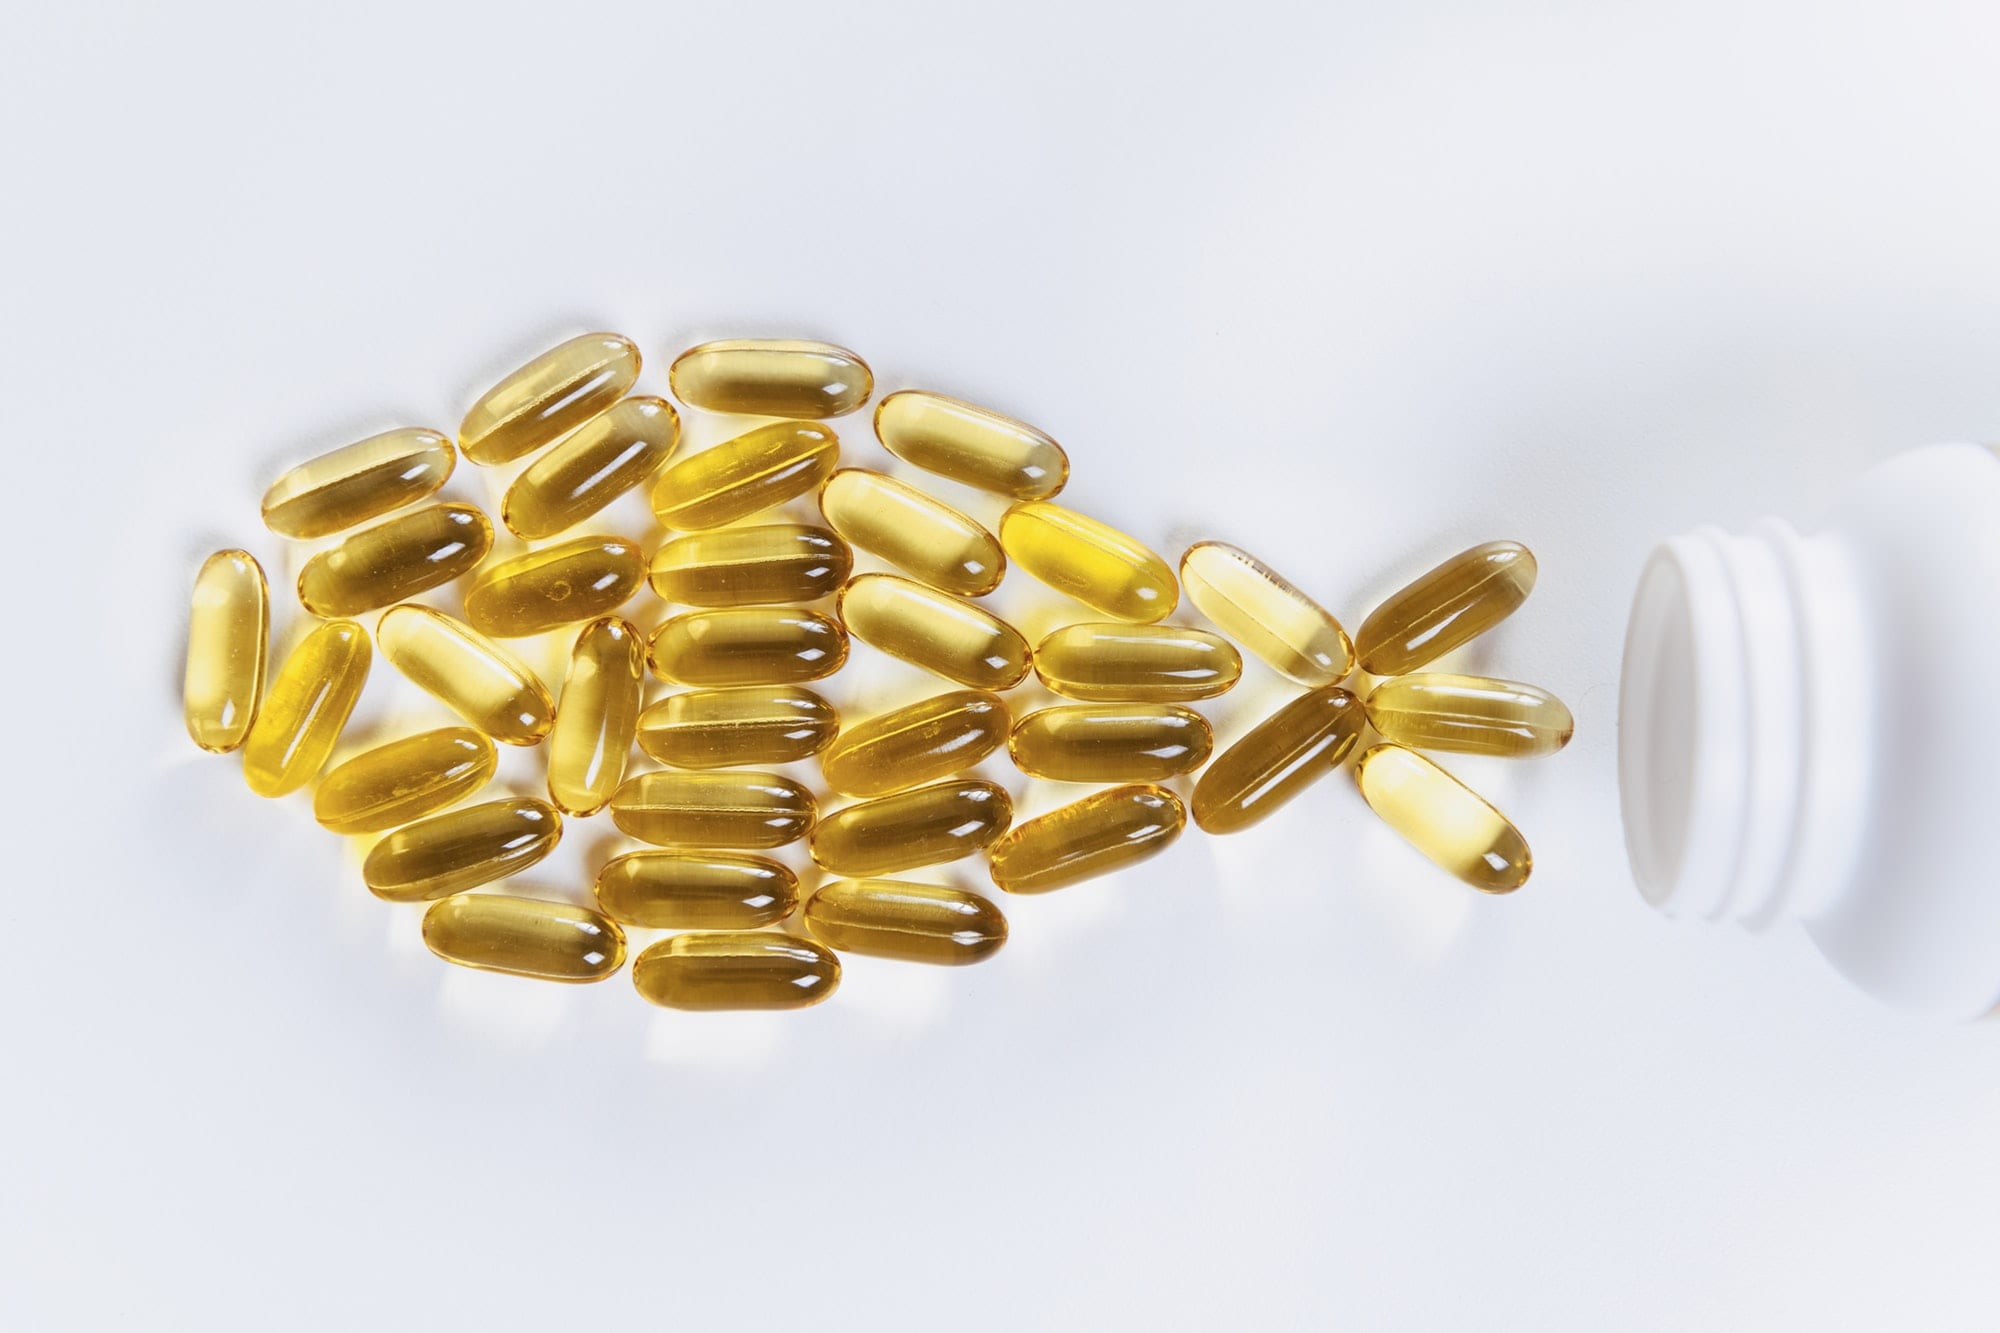 The Comprehensive Guide to the Benefits of Omega-3 Fatty Acids for Vegans